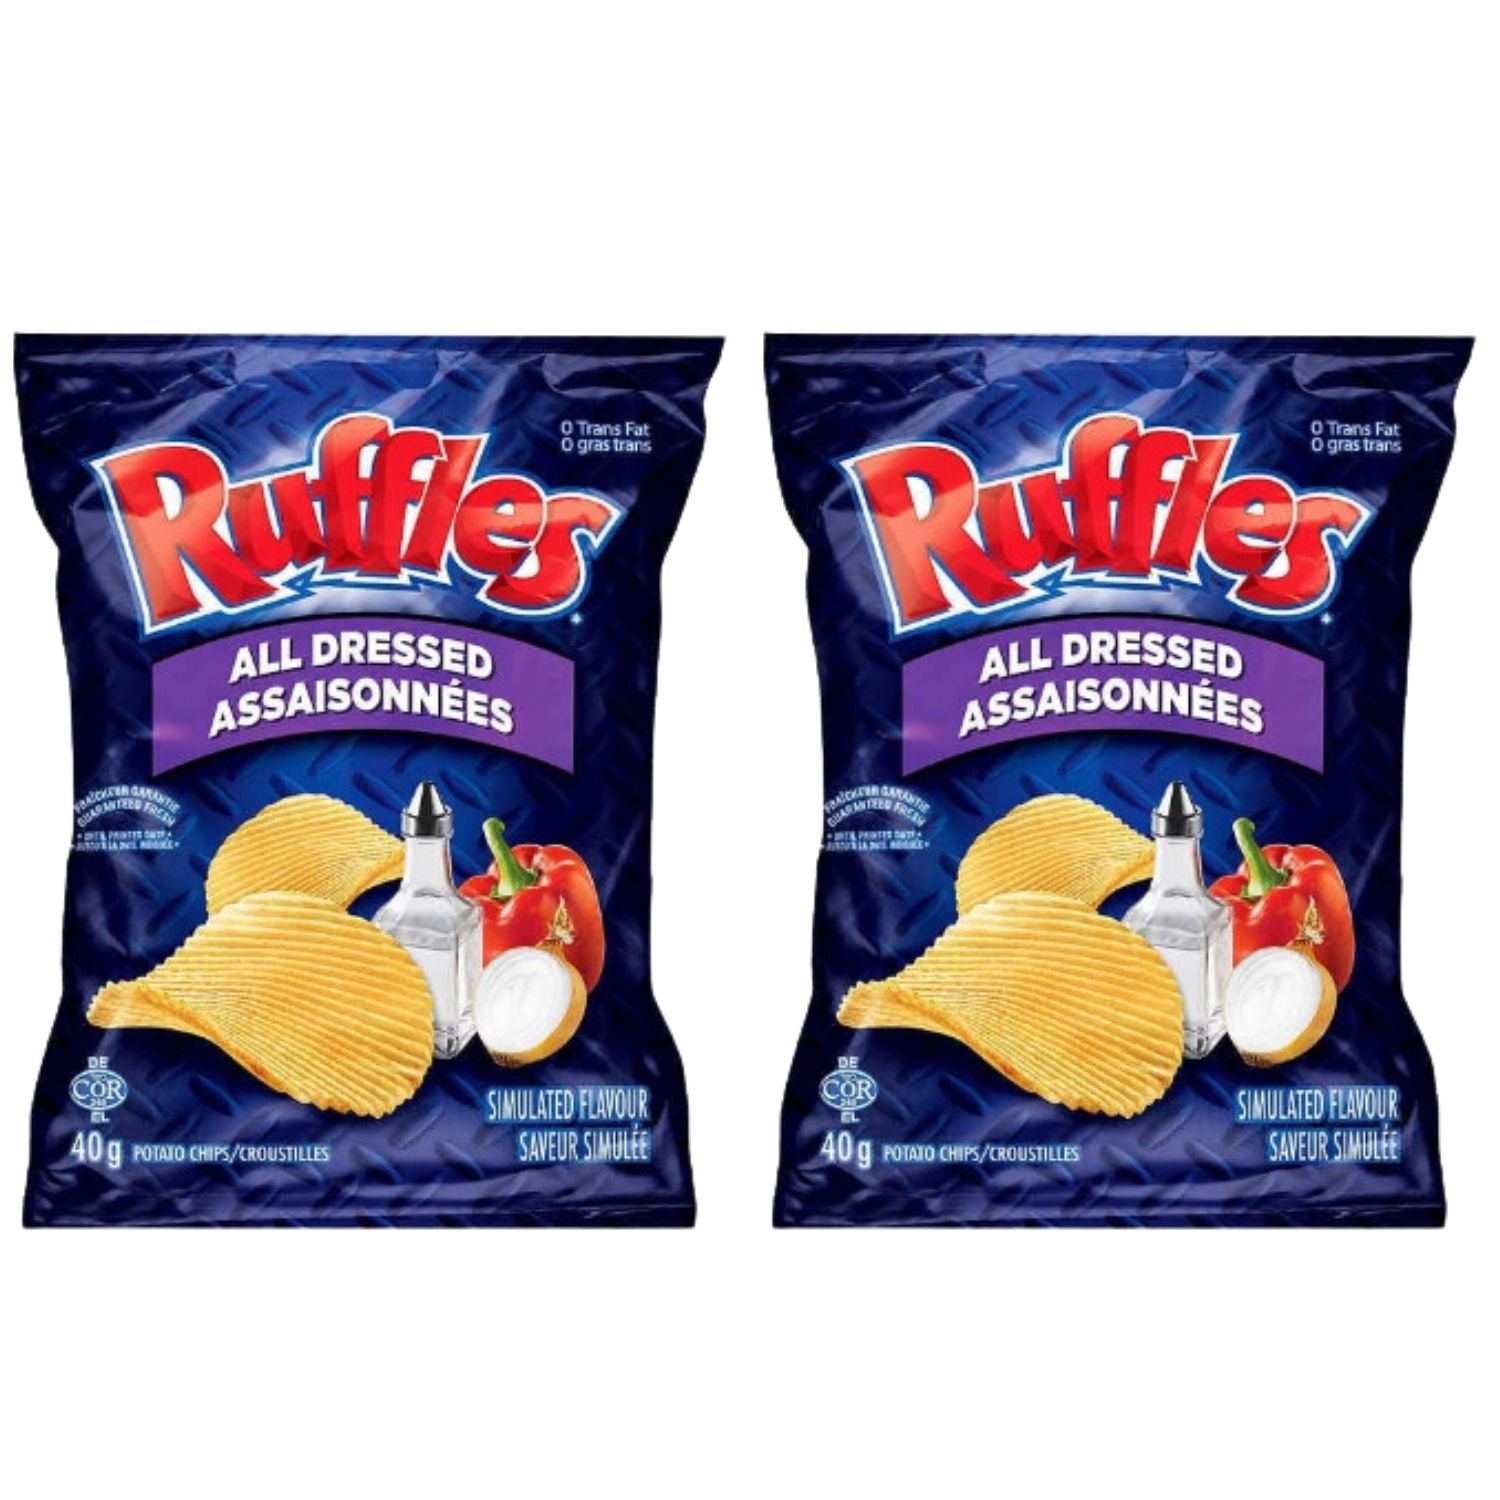 Ruffles All Dressed Chips Snack Bag pack of 2